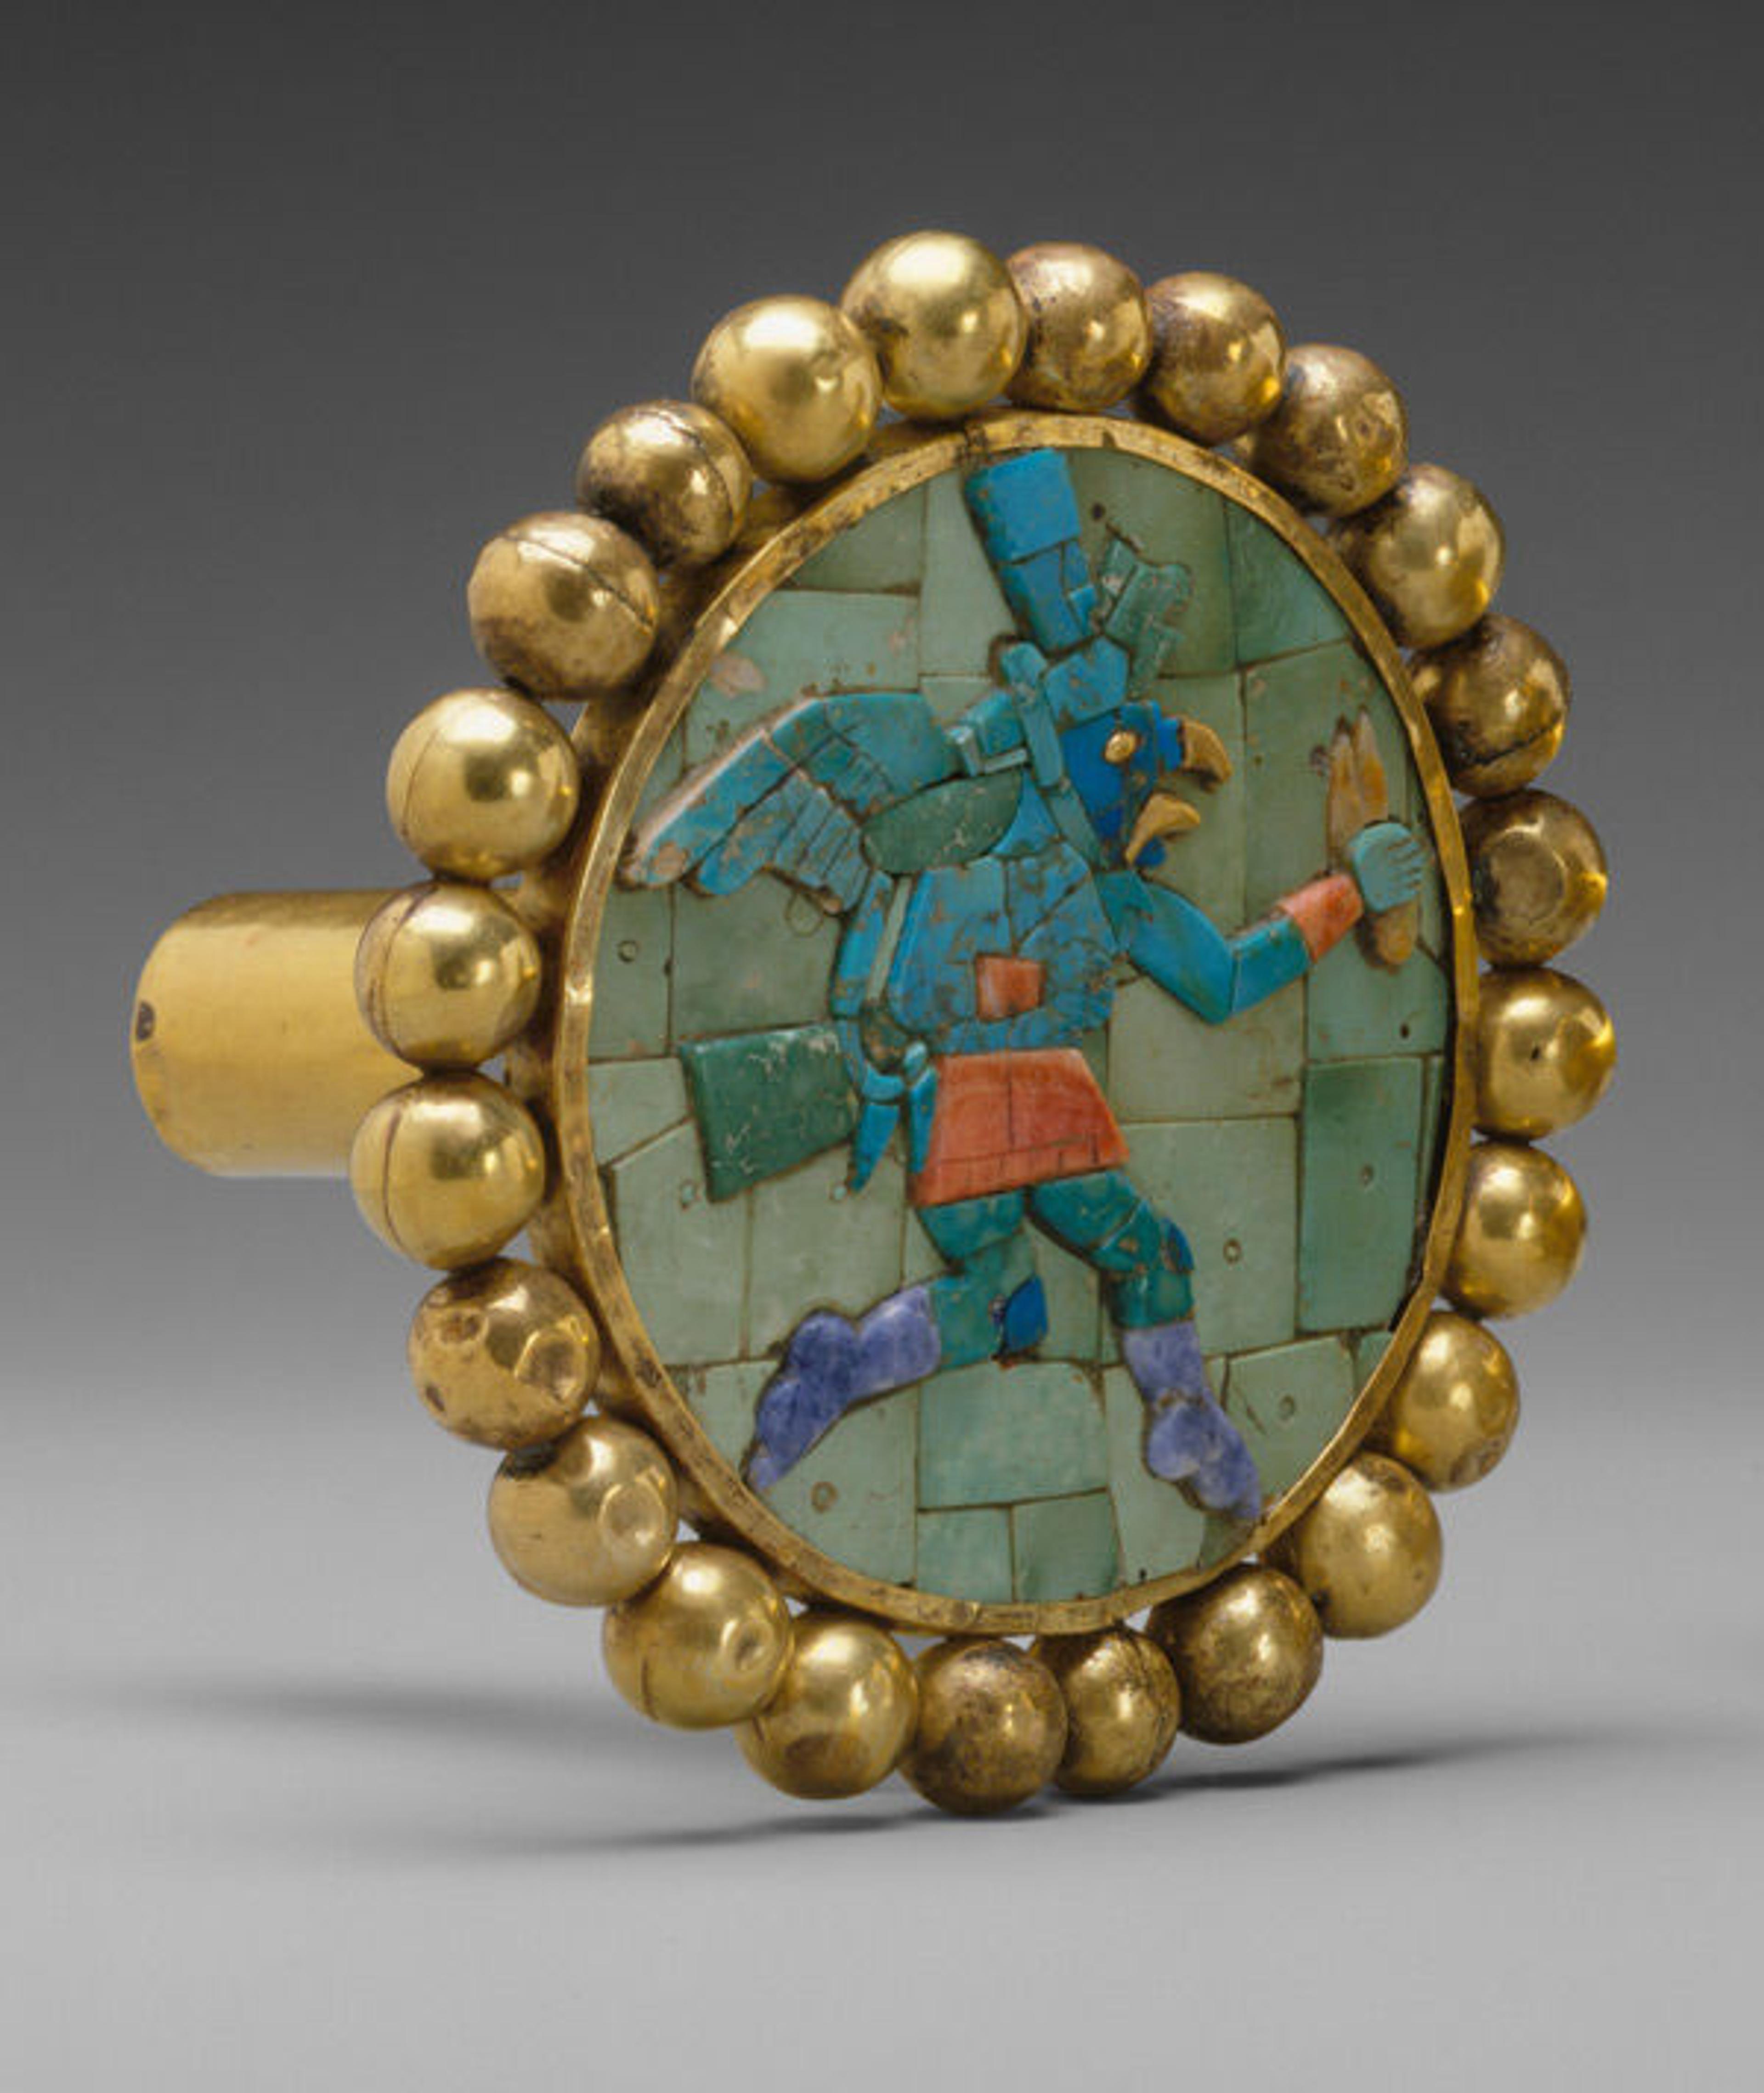 One earflare from a pair. Pair of Earflares, Winged Messengers, 3rd–7th century. Peru, Moche. Gold, turquoise, sodalite, shell; Diam. 3 3/16 in. (8 cm). The Metropolitan Museum of Art, New York, Gift and Bequest of Alice K. Bache, 1966, 1977 (66.196.40-.41)